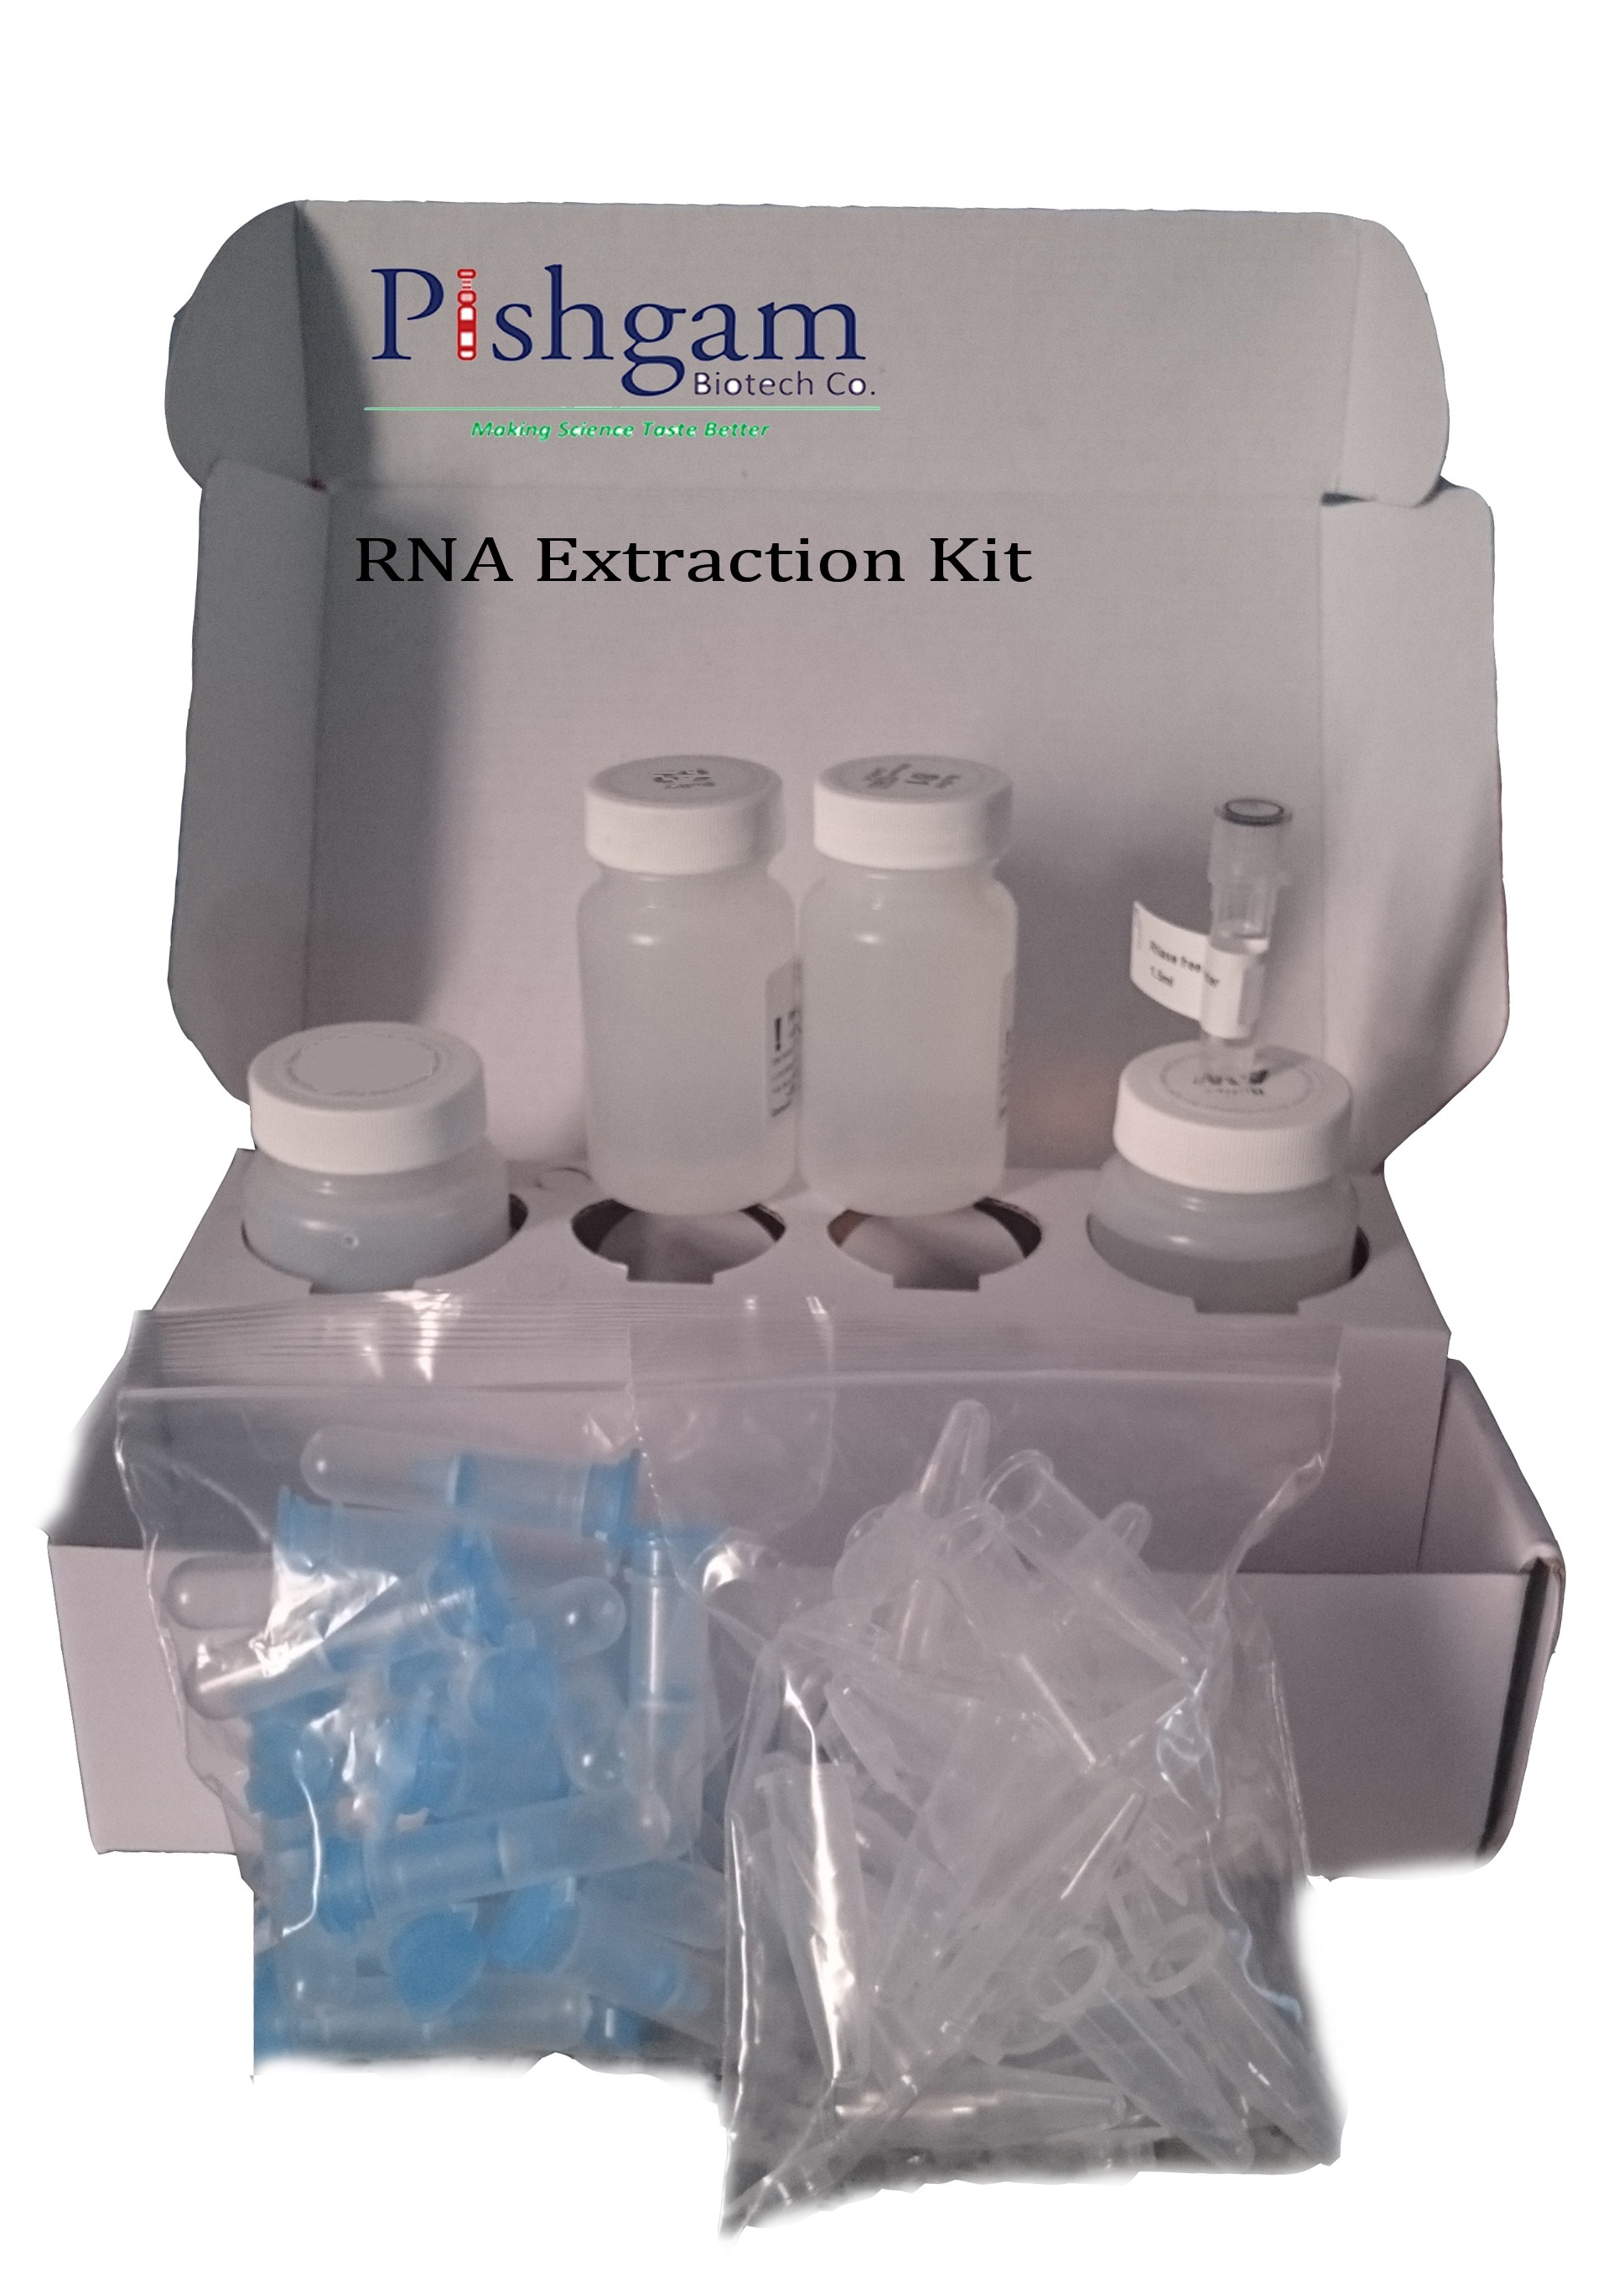 RNA Extraction Kit-50 tests